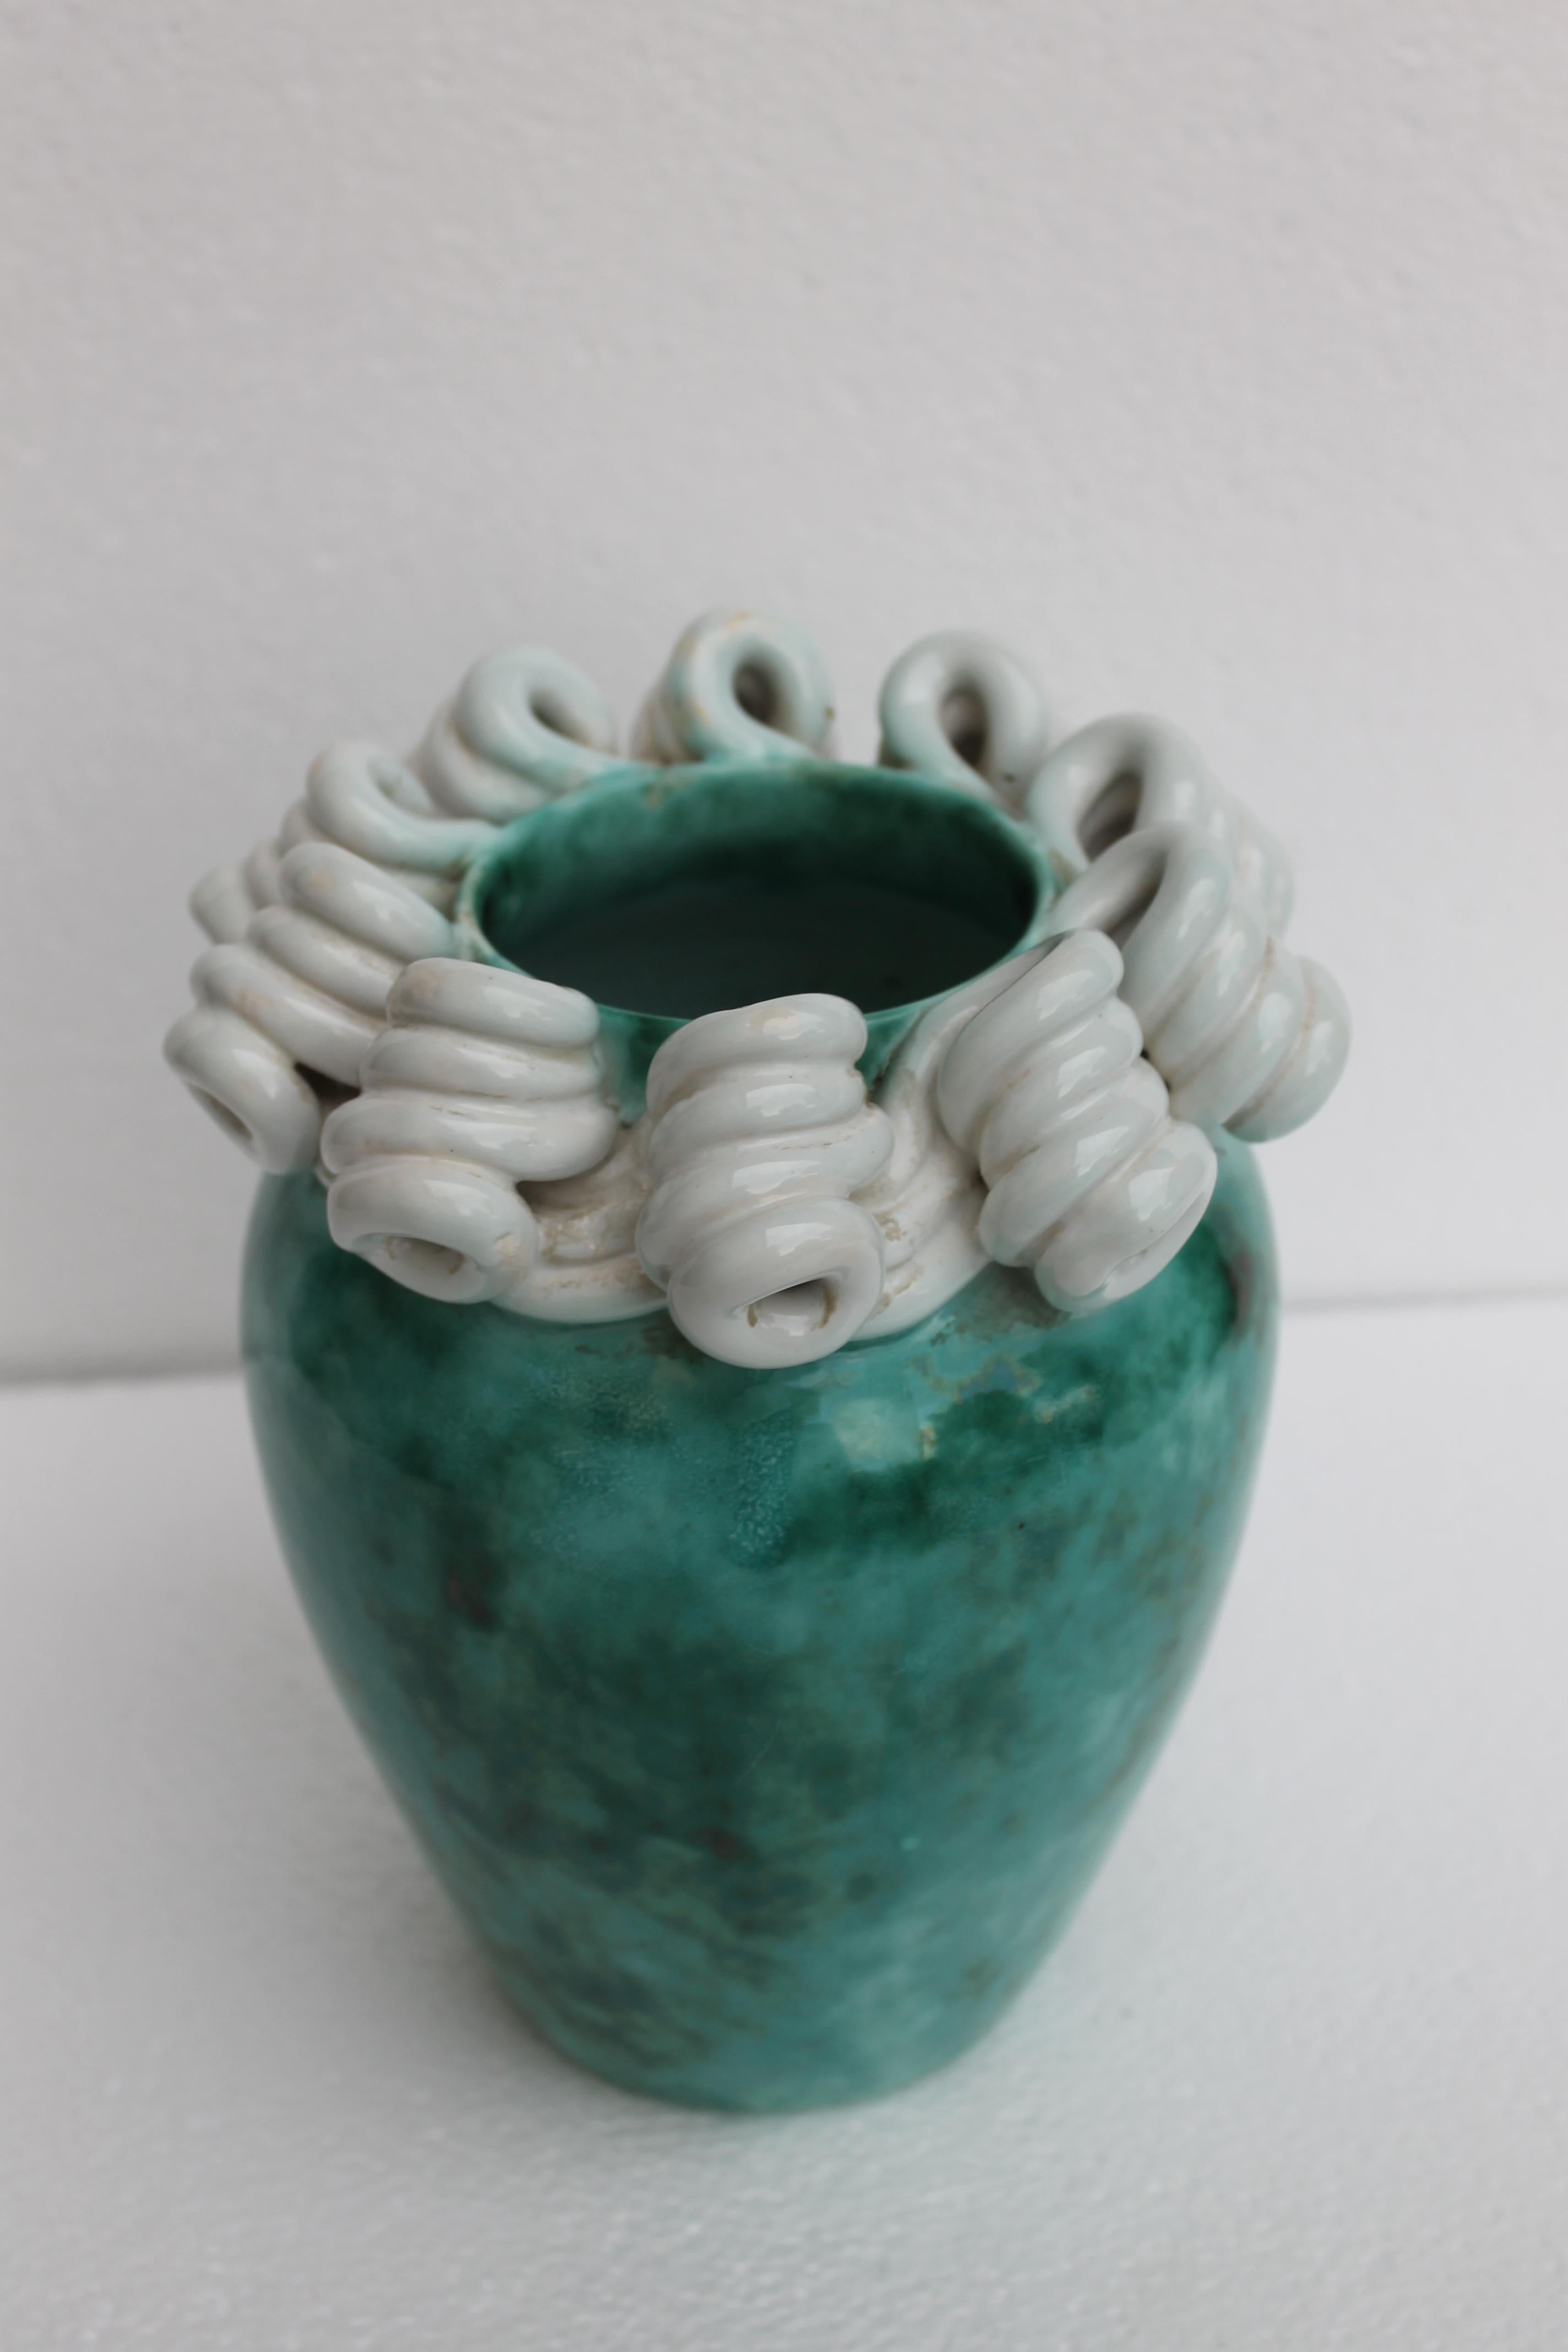 Art Deco vase, in marbled turquoise ceramic with a white spiral collar on the top. Made in Italy, dated 1930s.